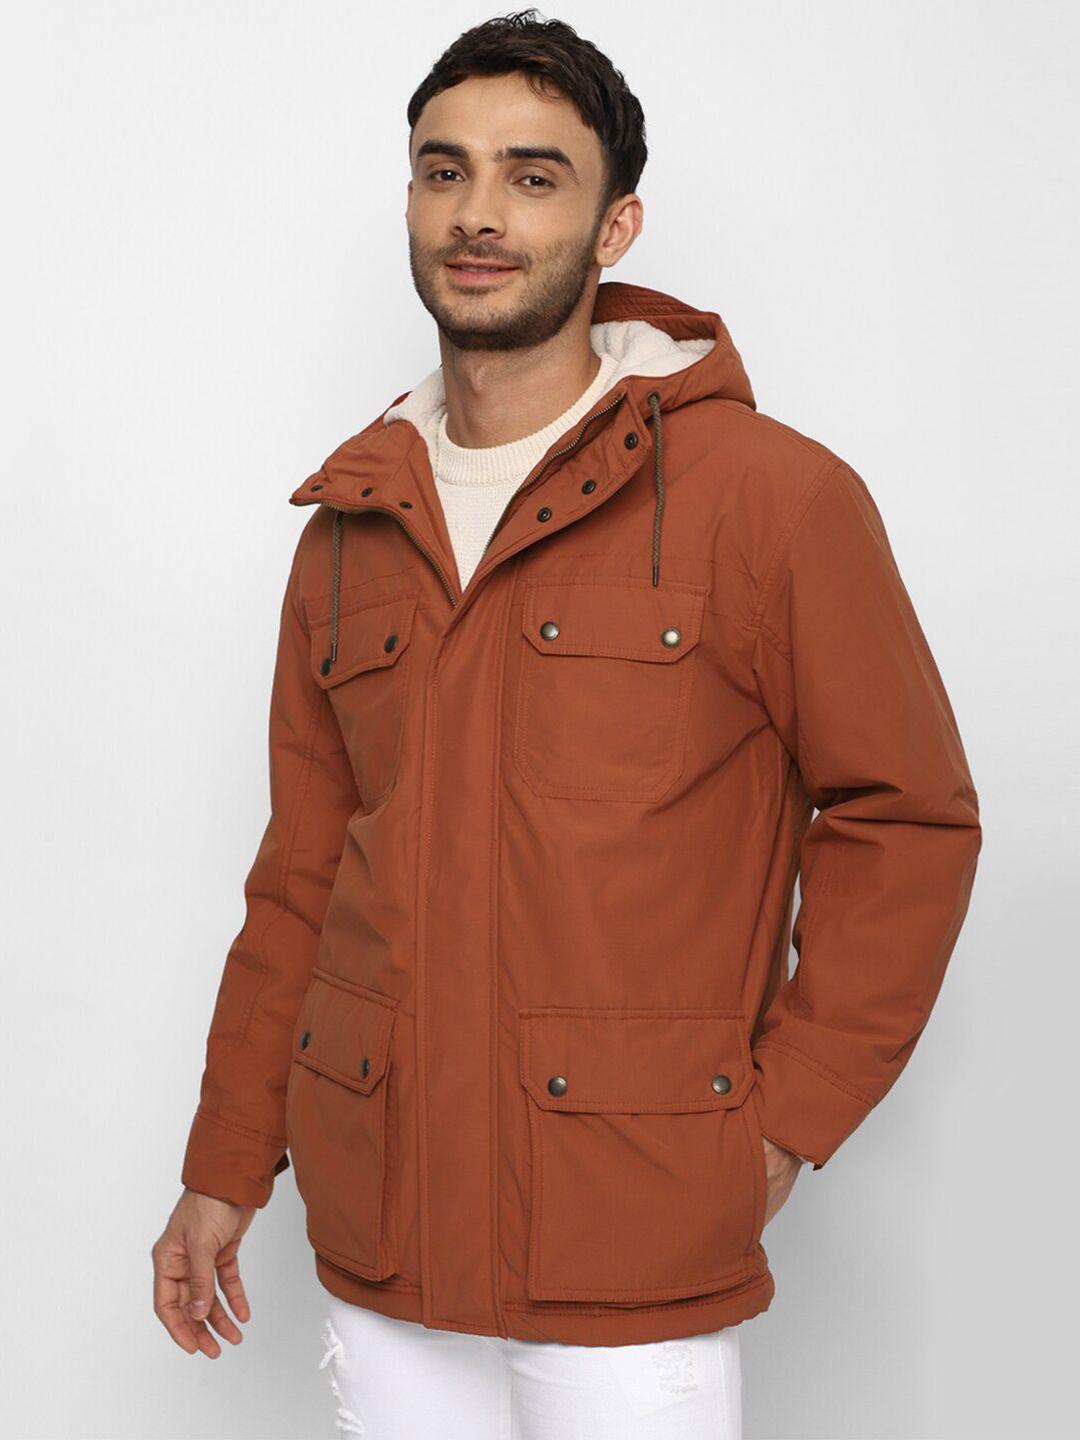 american-eagle-outfitters-men-cotton-hooded-parka-jacket